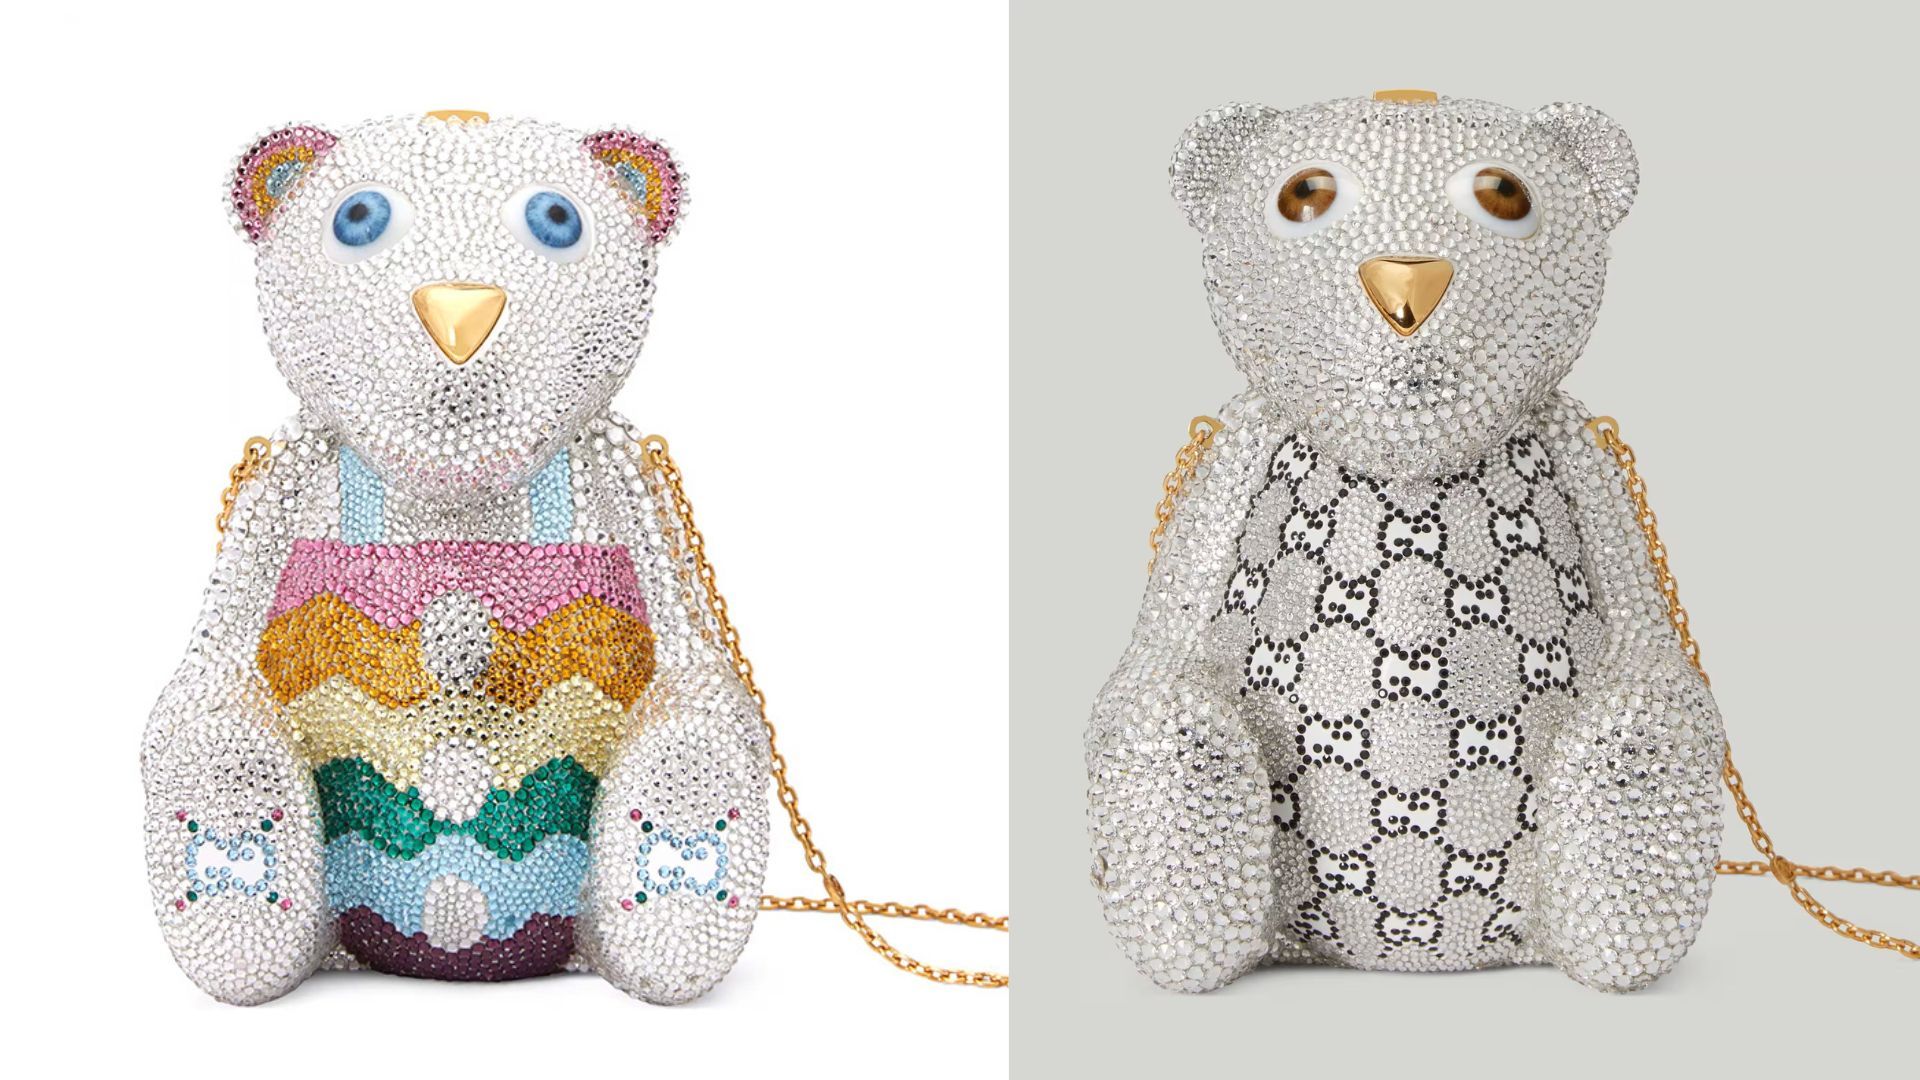 The controversy of Louis Vuitton's monogrammed teddy bear